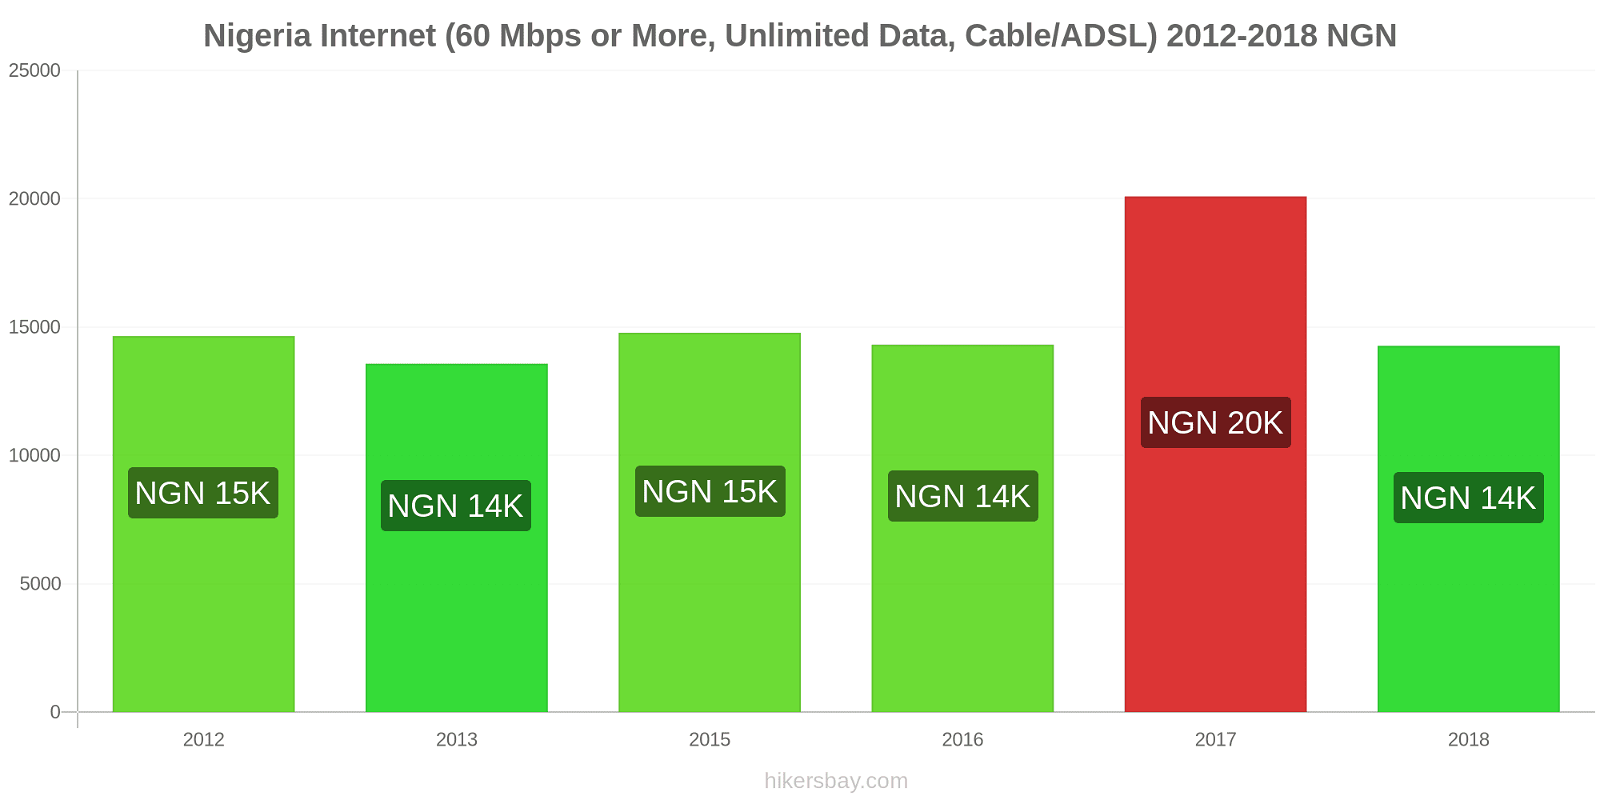 Nigeria price changes Internet (60 Mbps or more, unlimited data, cable/ADSL) hikersbay.com